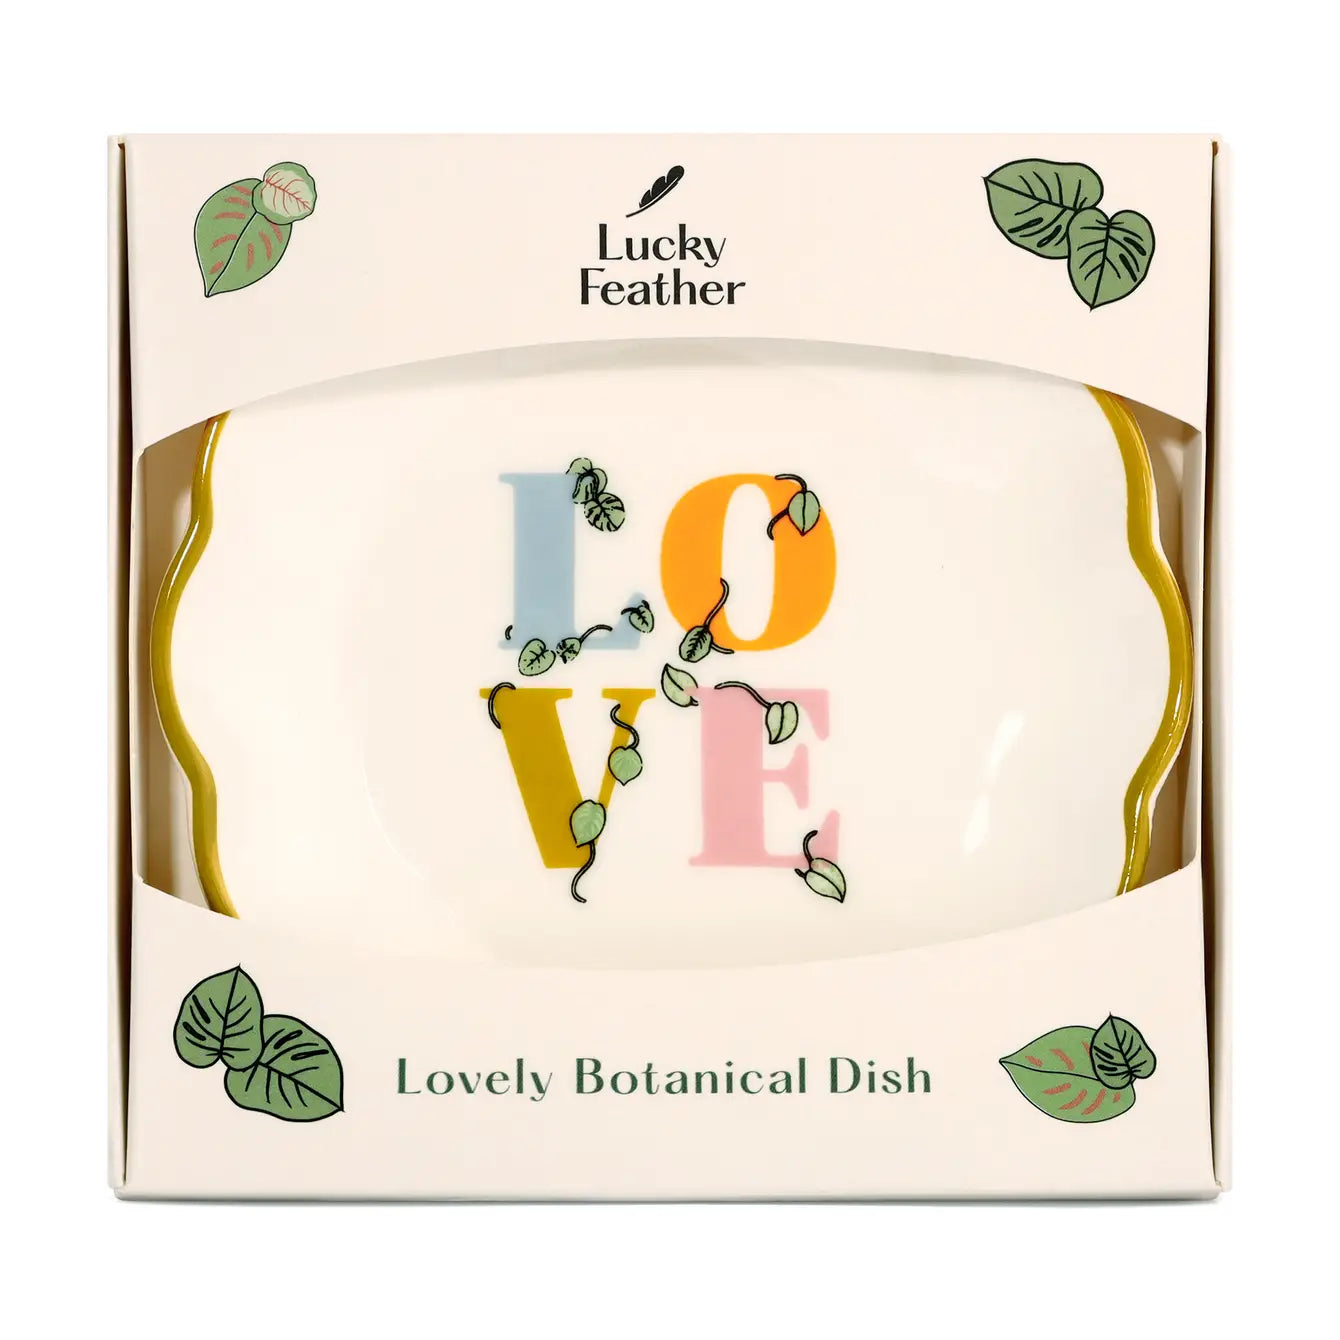 Botanical Dish by Lucky Feather